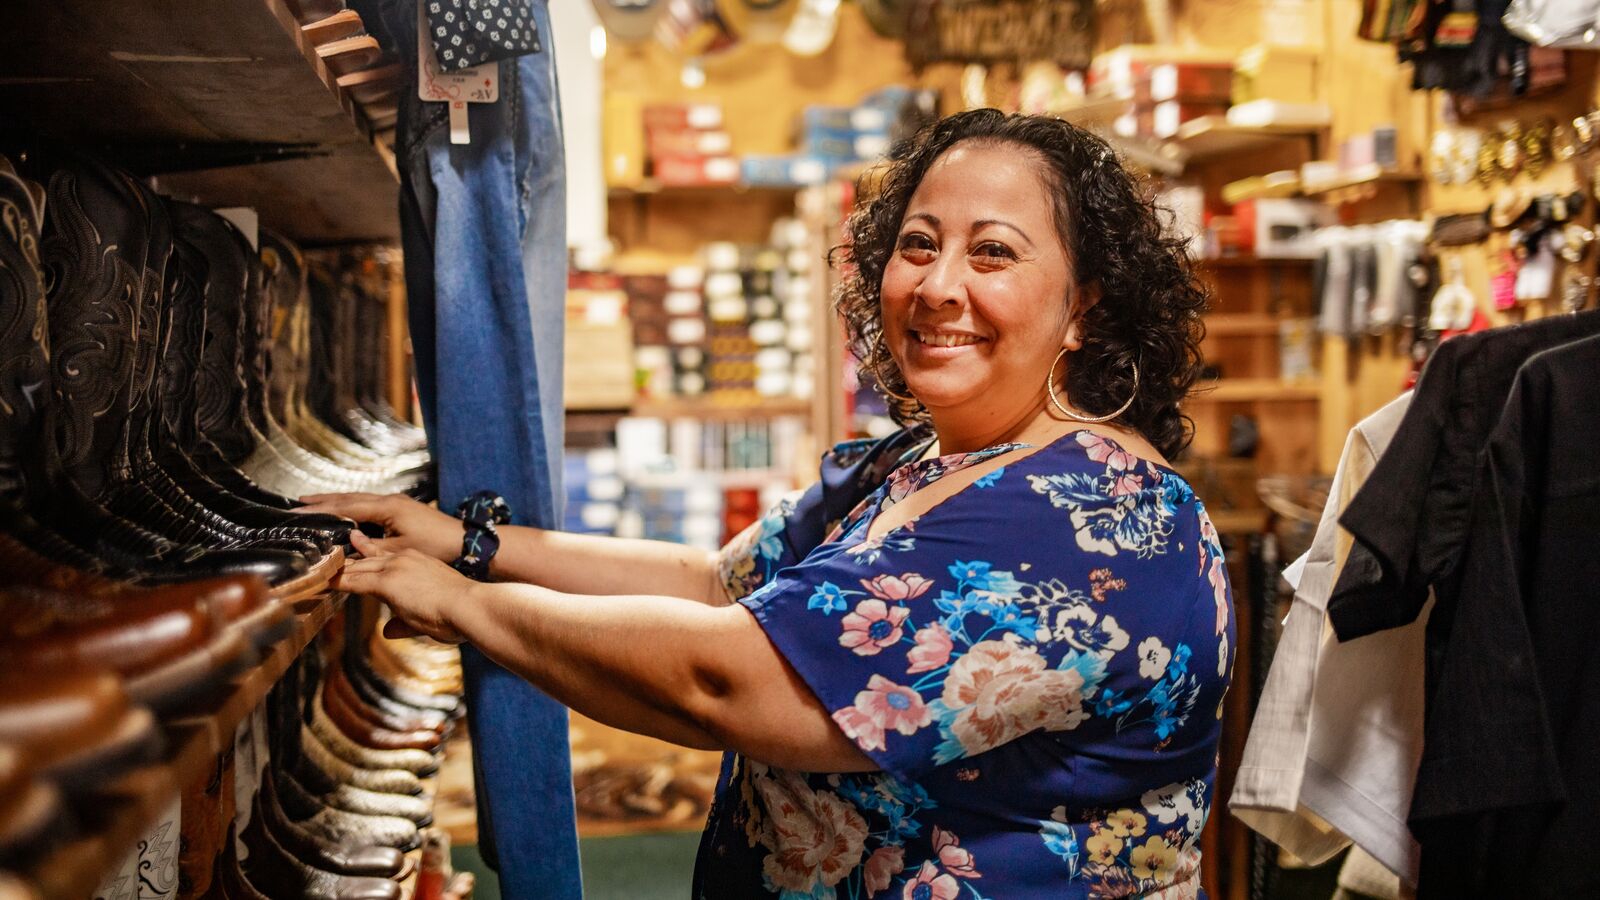 A small business owner stands in front of cowboy boots in her store